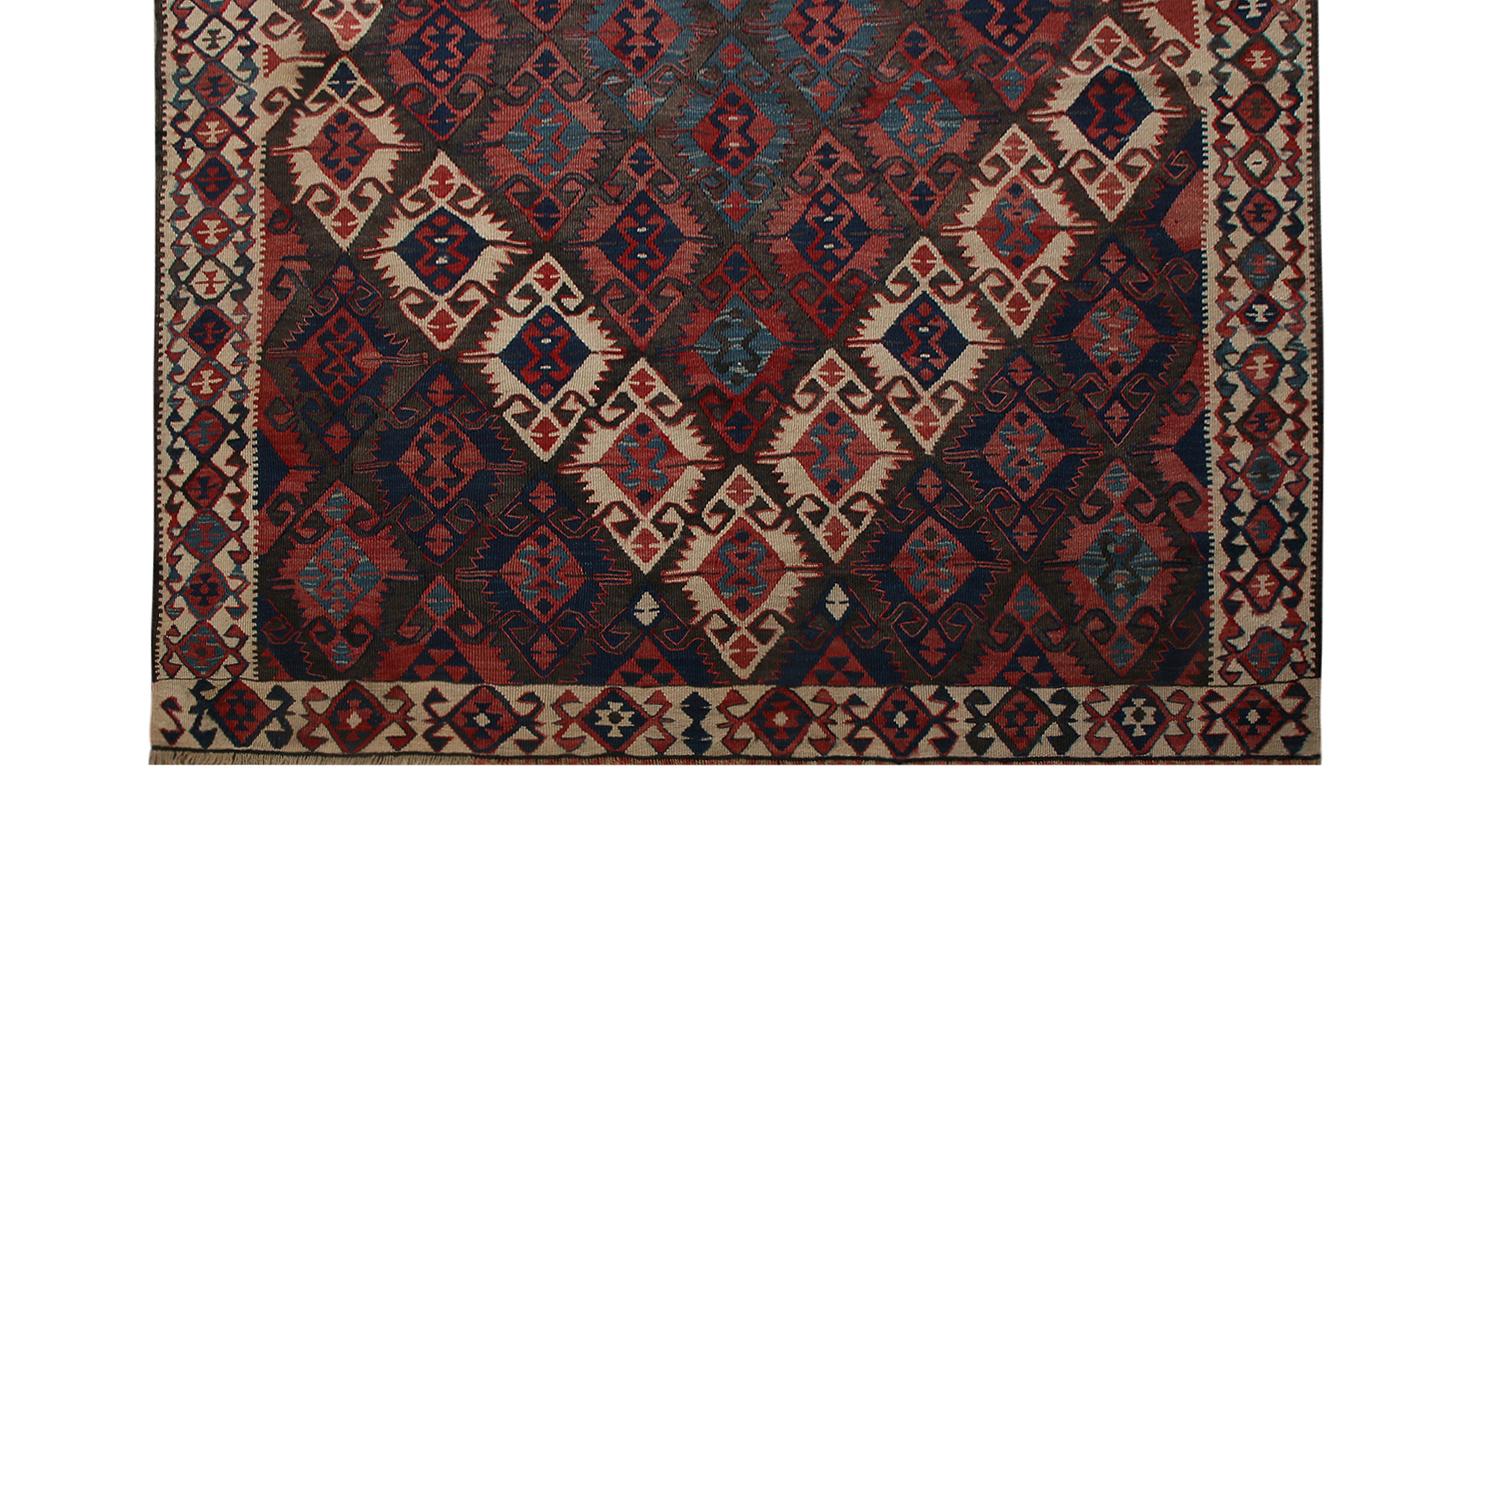 Hand-Woven Vintage Midcentury Brown and Red Wool Kilim Rug with Blue Accents by Rug & Kilim For Sale